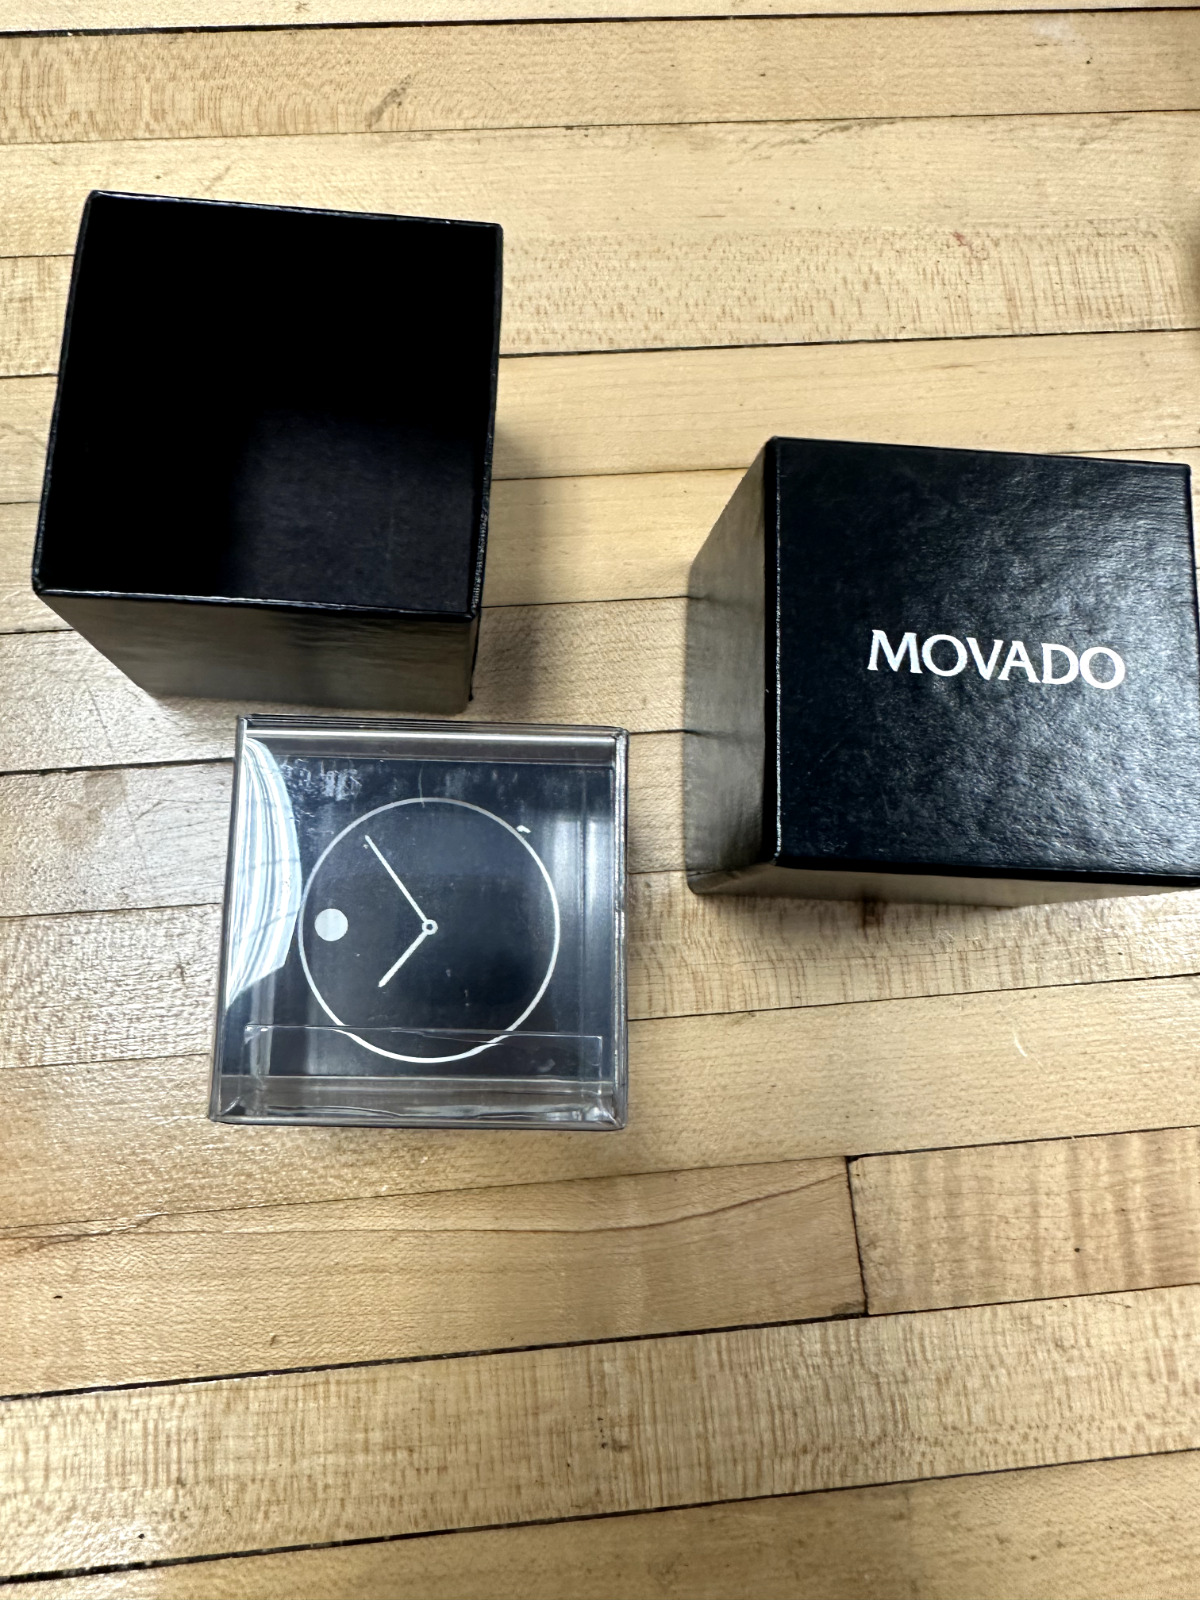 Movado Watch Promo Paperweight Crystal Clear Glass Cube 3view  NIB